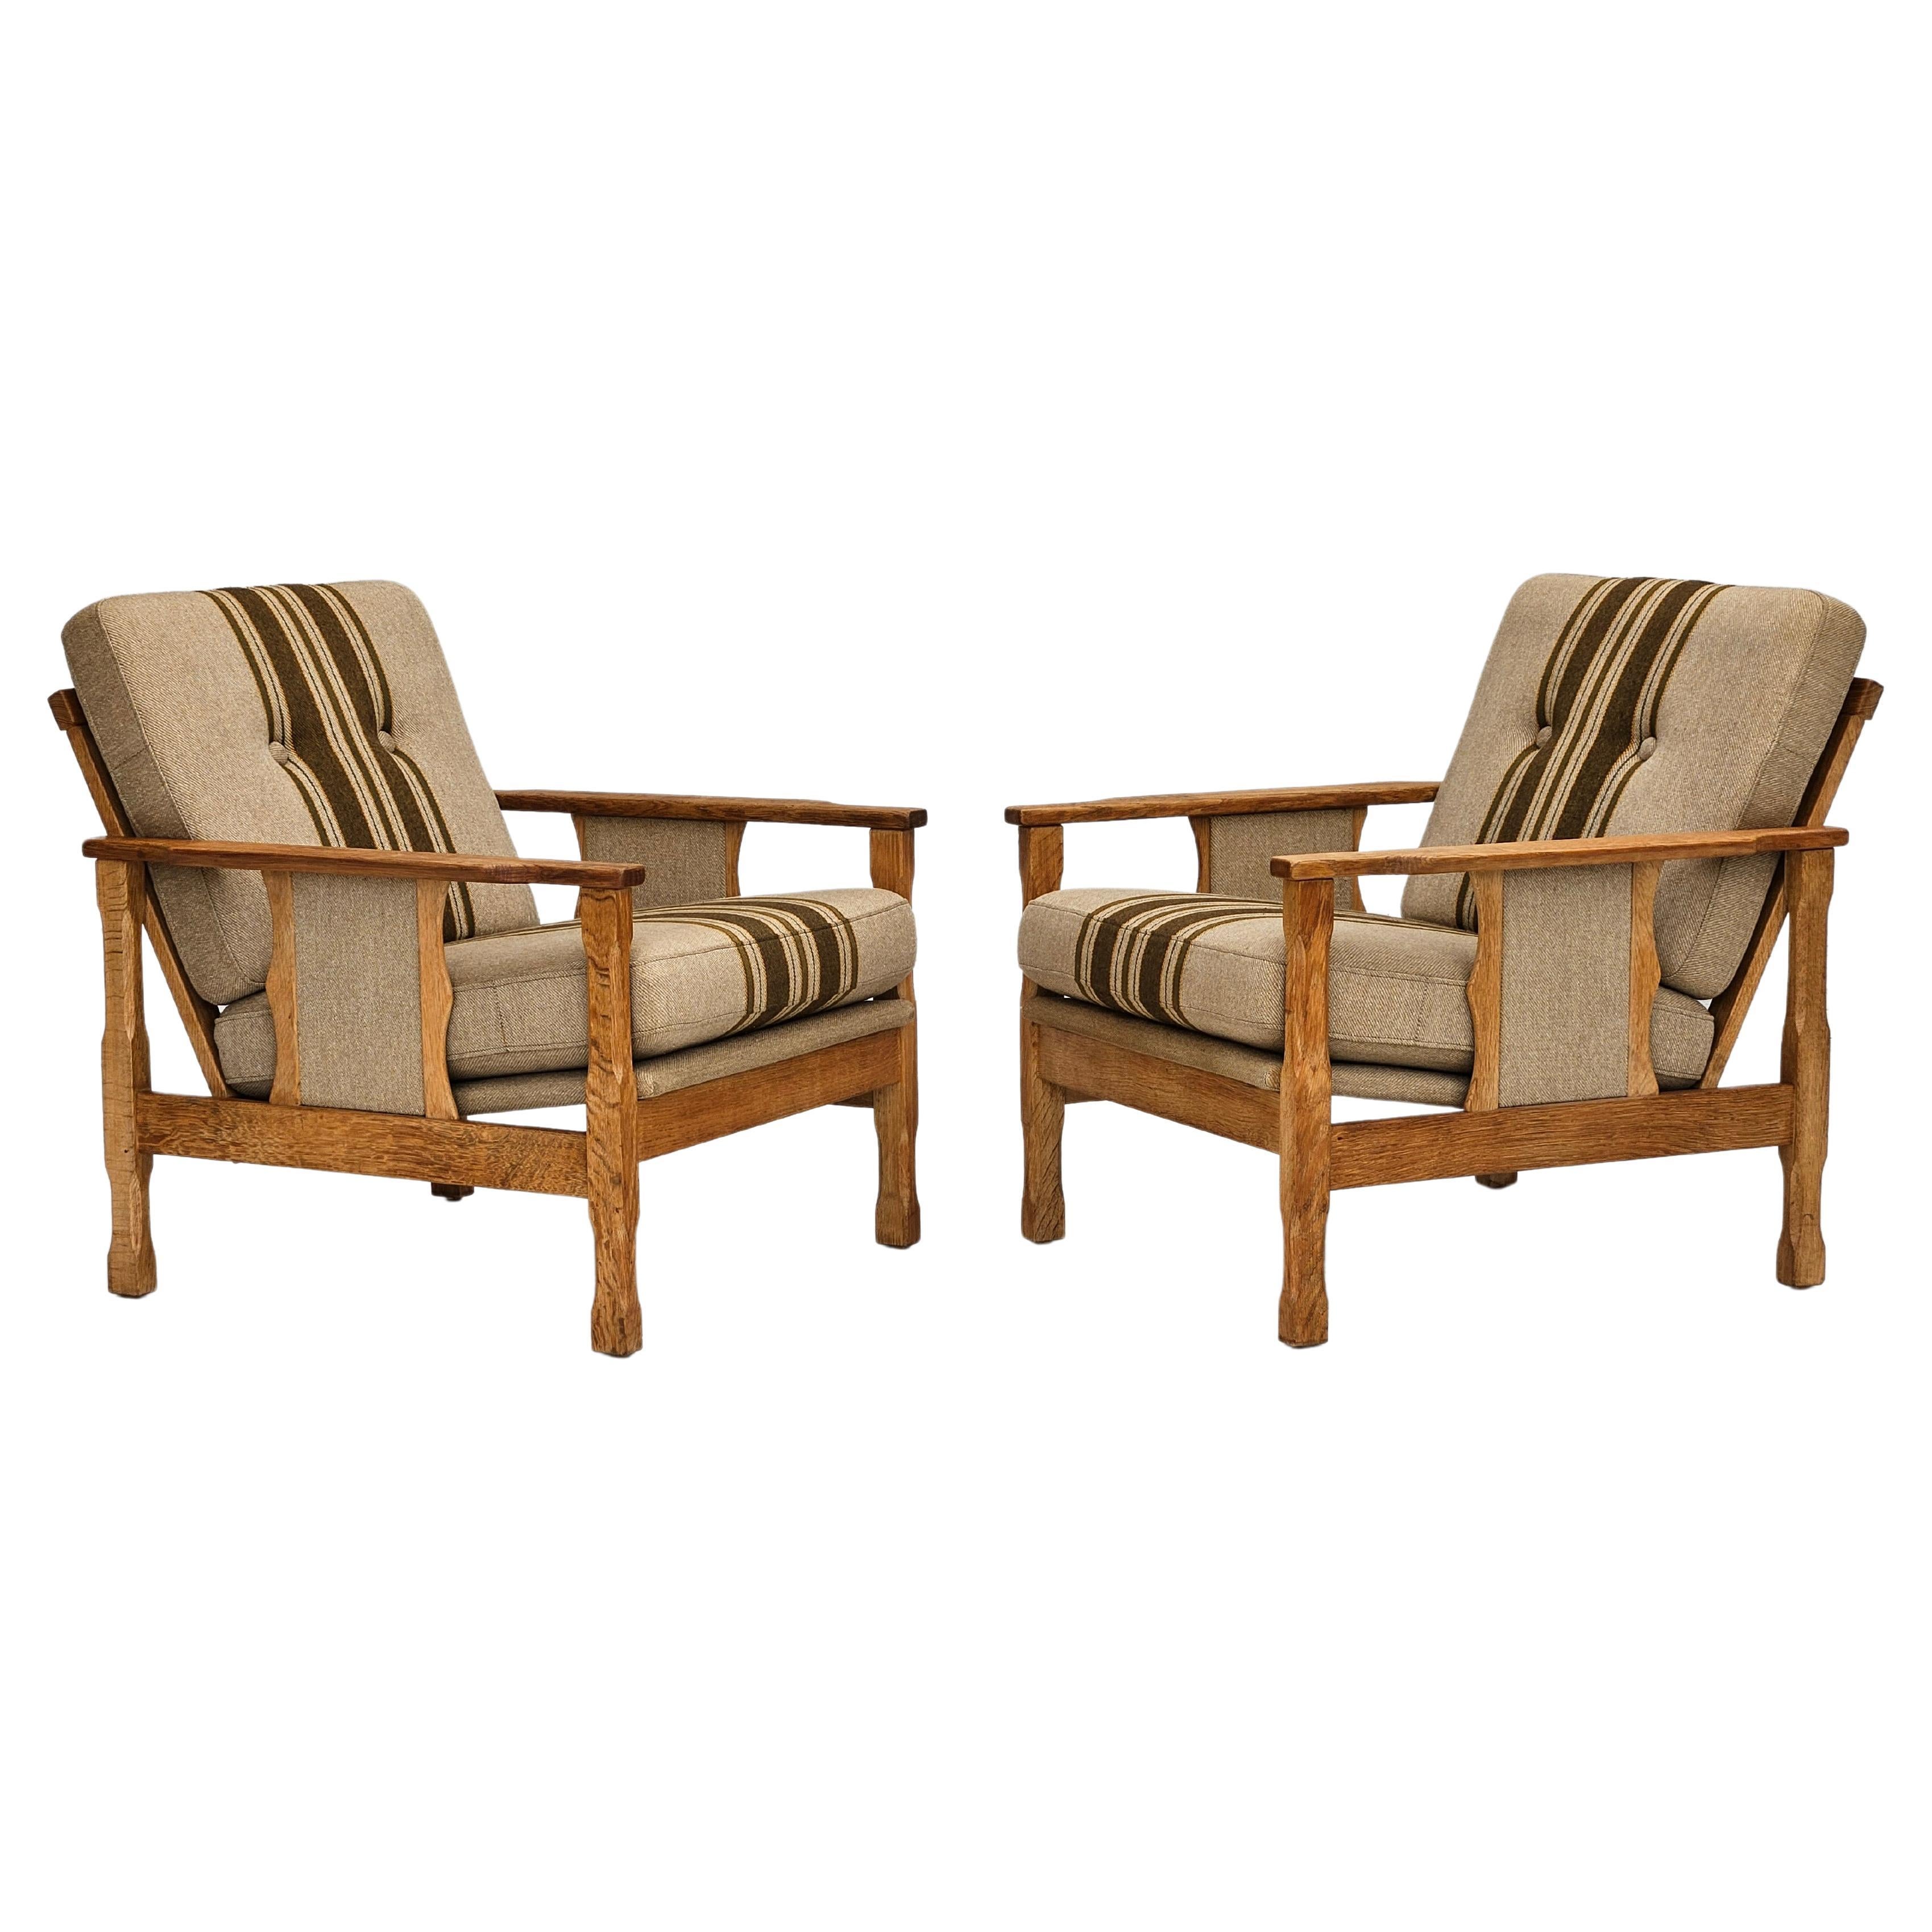 1970s, pair of Danish lounge chairs, original very good condition, wool, oak. For Sale